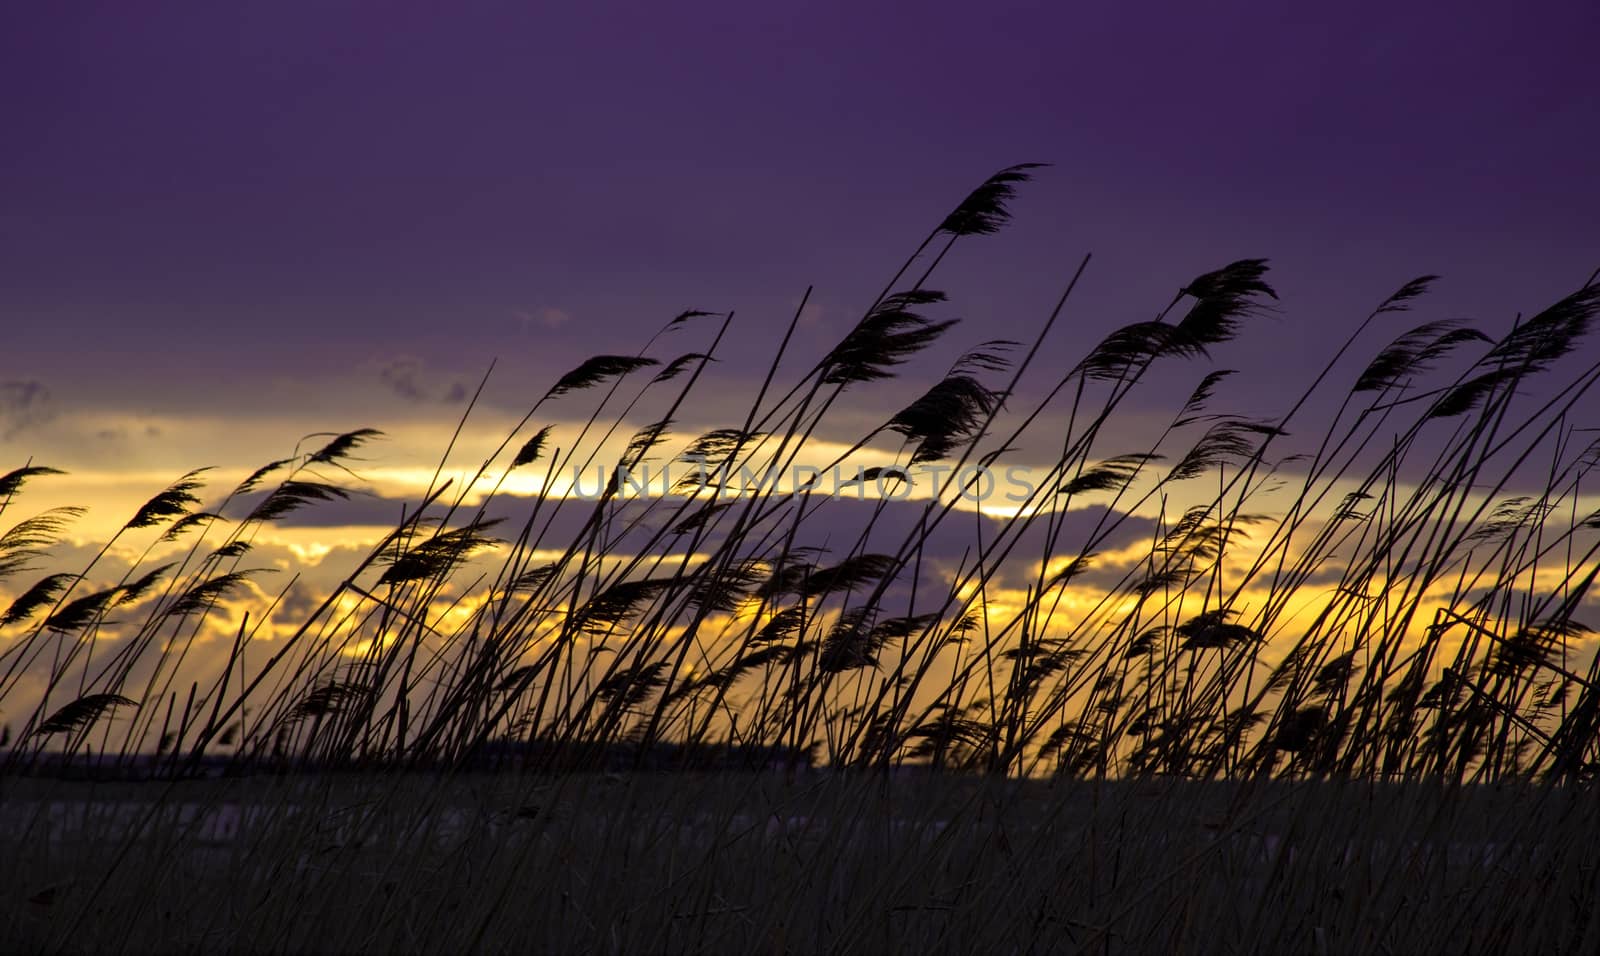 Silhouette of spikelet grass against background of colorful sky at sunset. by Anelik